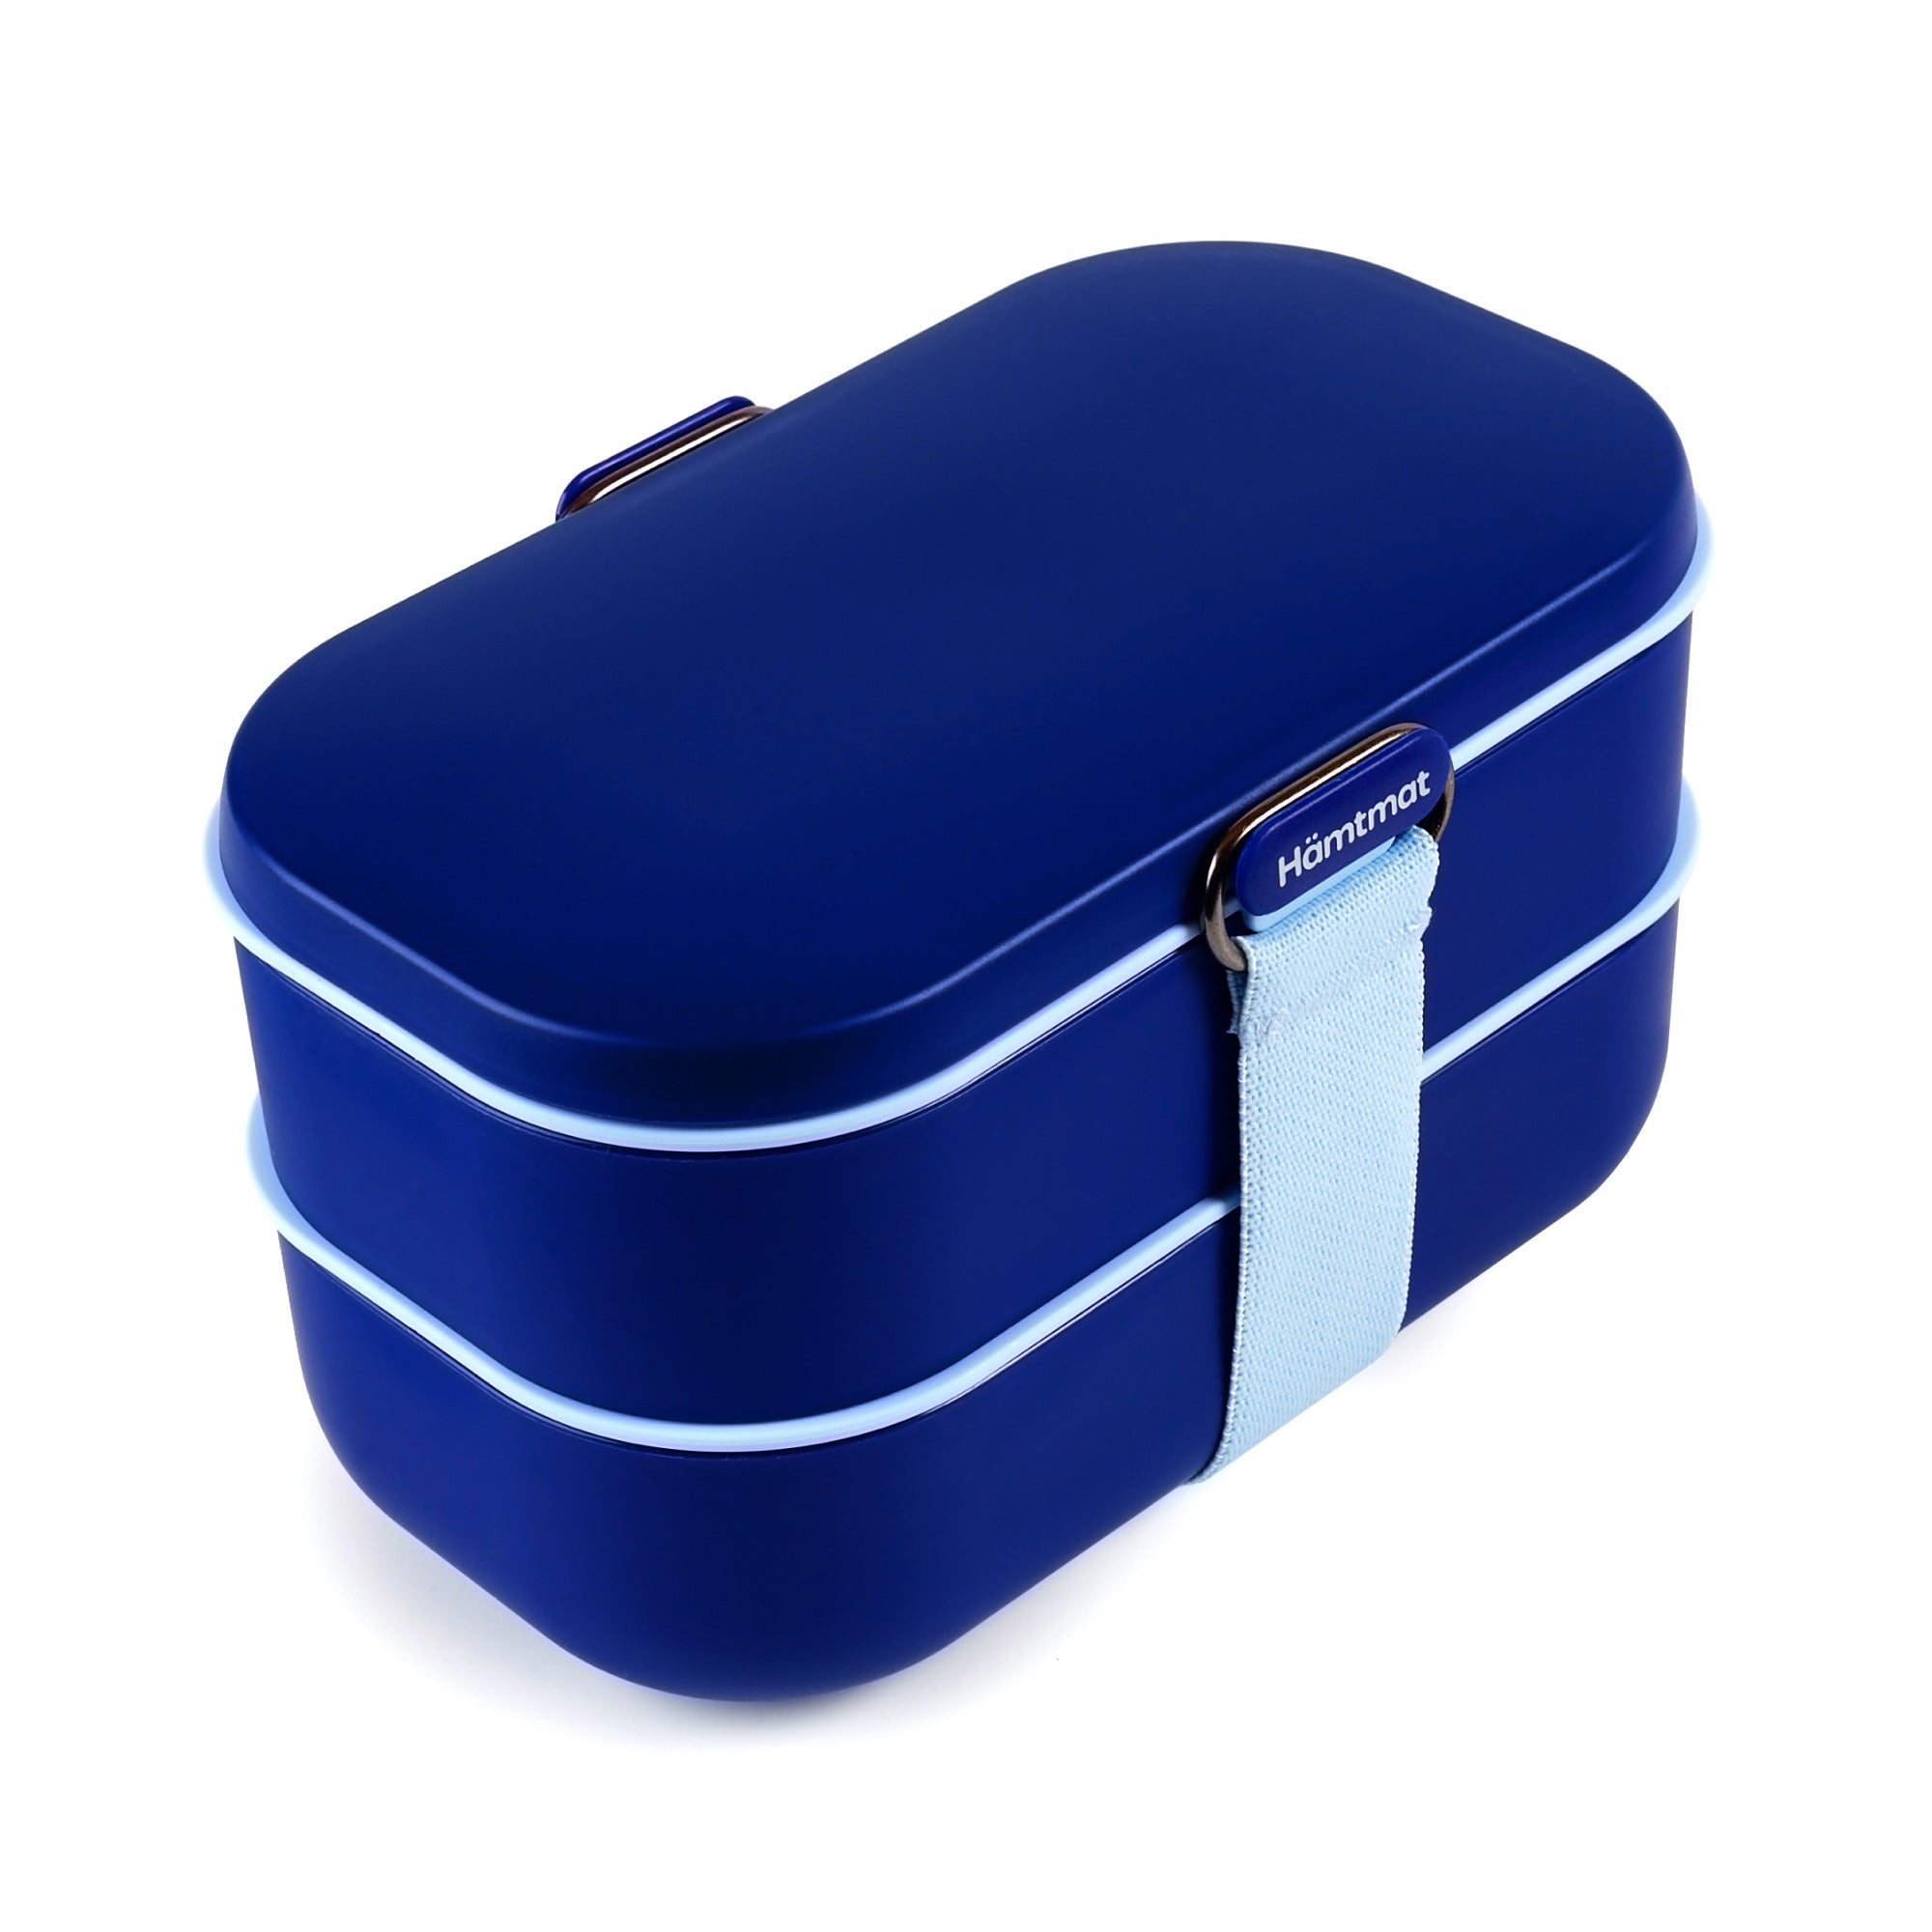 Discover Your True Self with the Mariana Trench Bento Lunch Box – Hämtmat